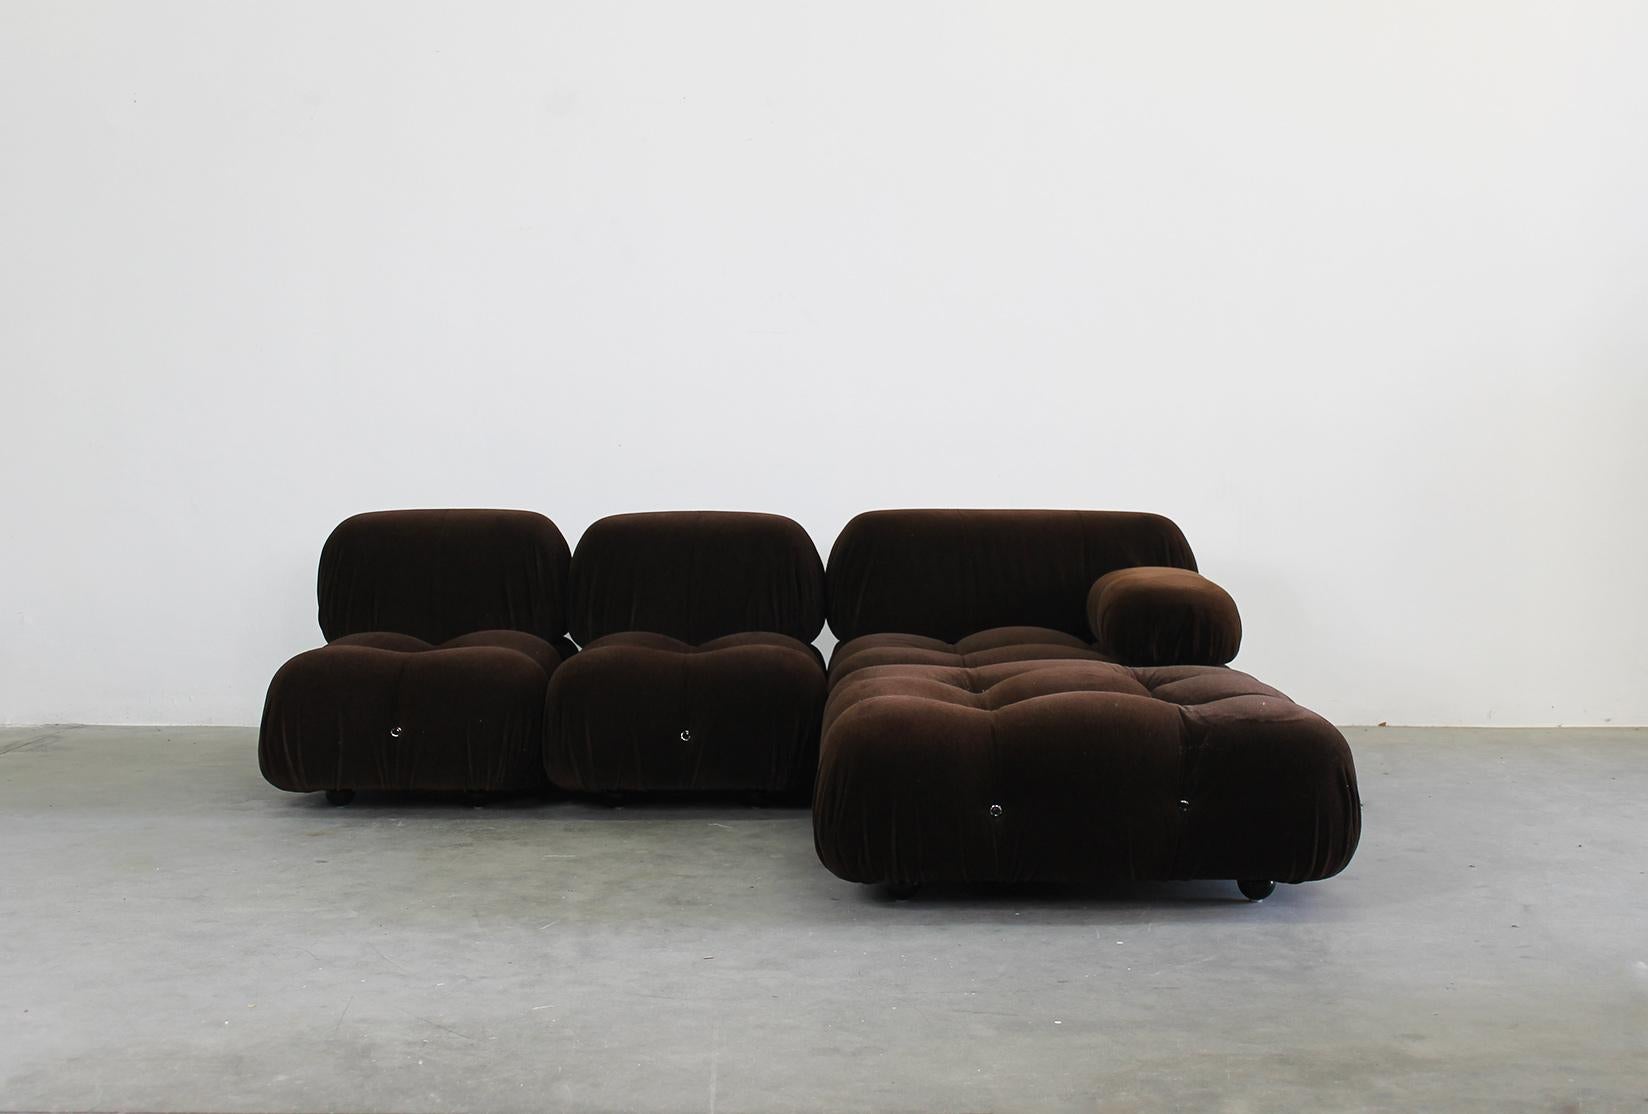 Camaleonda modular sofa with structure in polyurethane foam padded and upholstered with a dark brown velvet. This set is composed by two large modules and two small modules which could be assembled thanks to the the innovative system of cables,